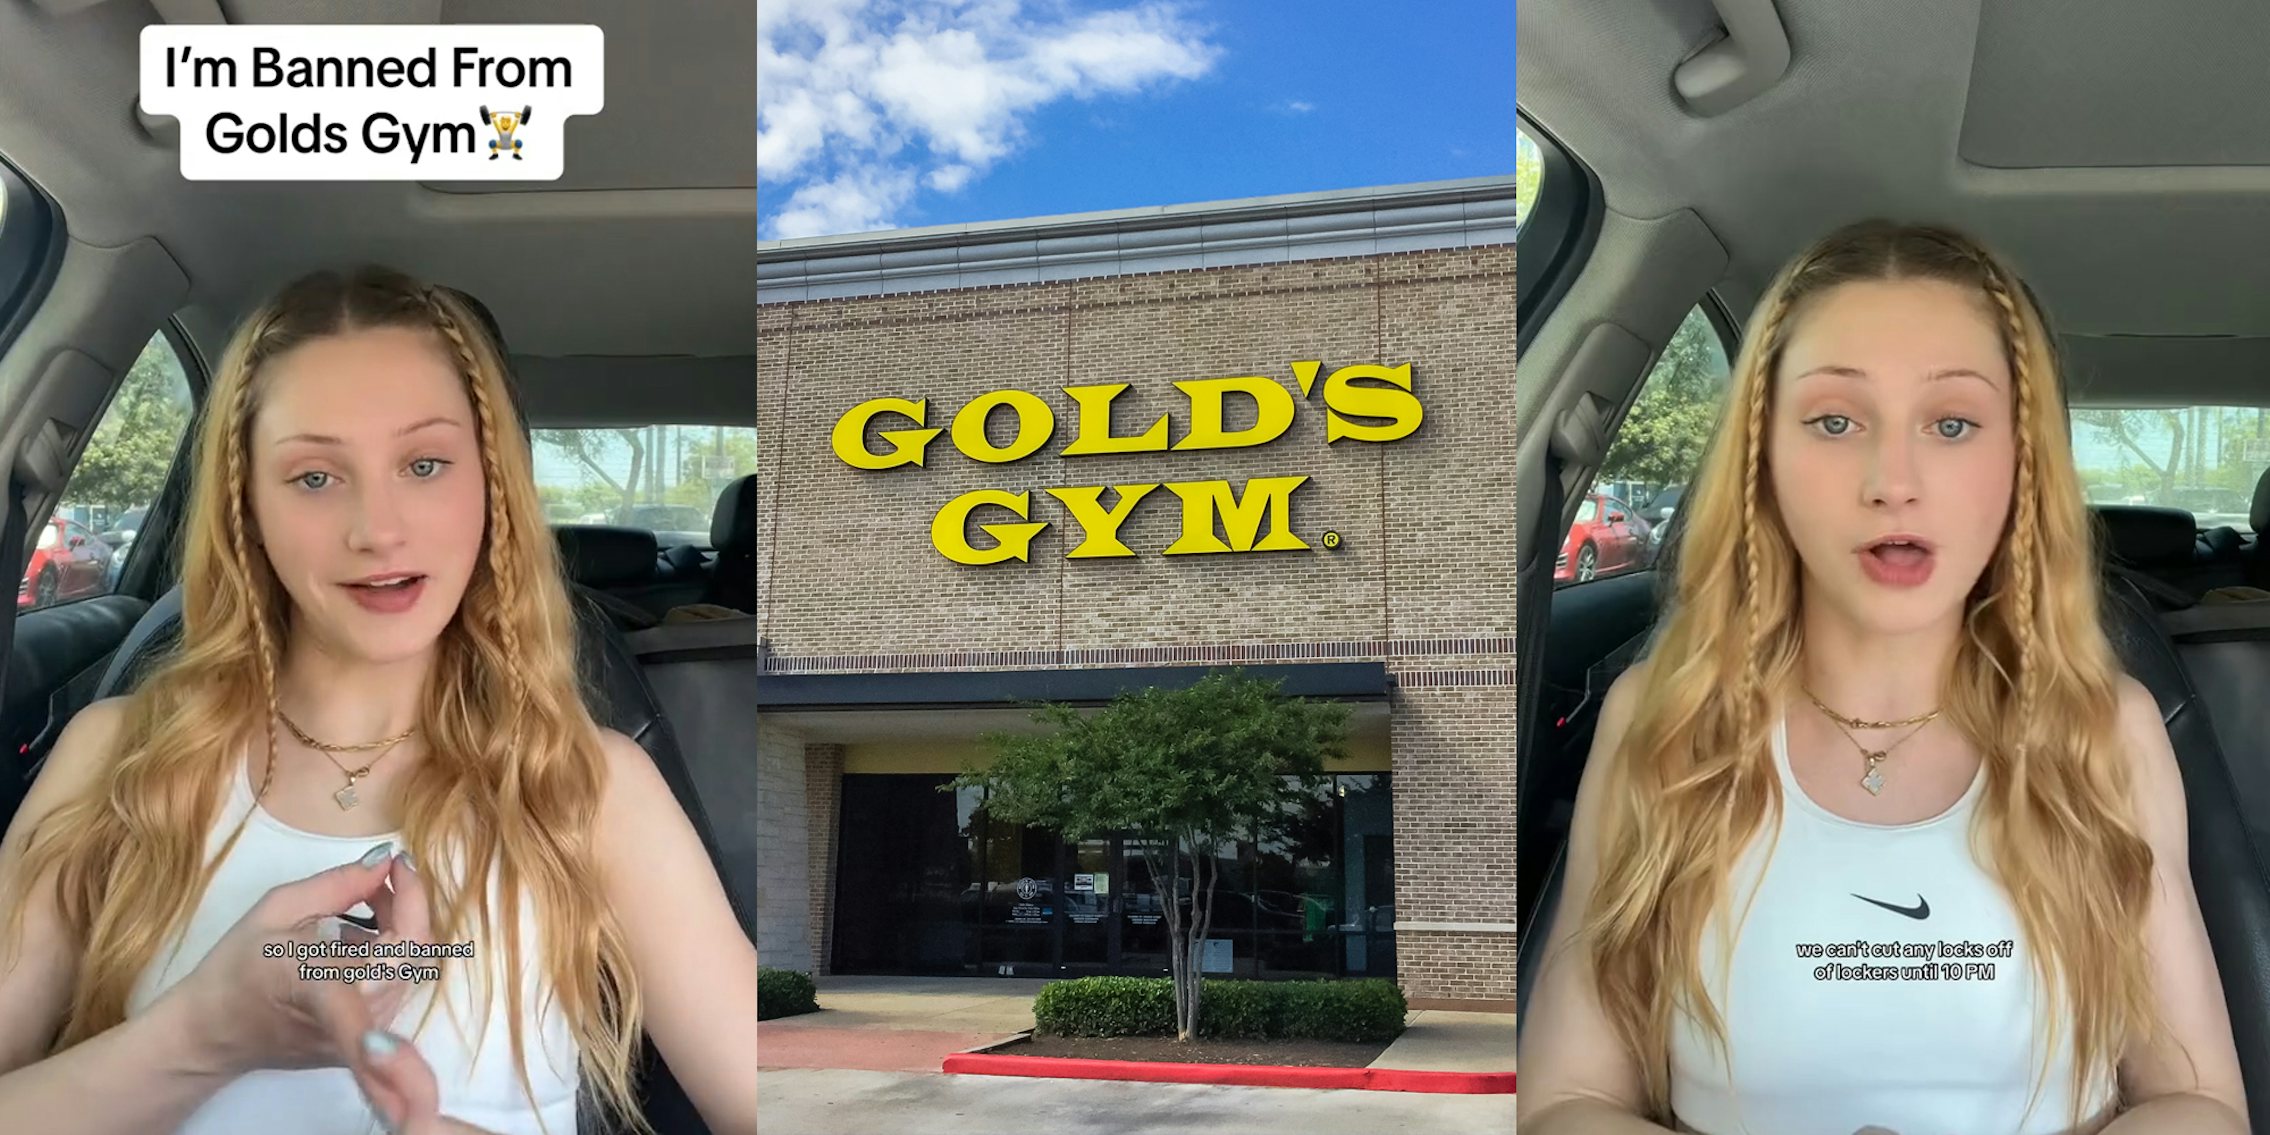 former Gold's Gym employee speaking in car with caption 'I'm Banned From Gold's Gym so I got fired and banned from gold's gym' (l) Gold's Gym building with sign (c) former Gold's Gym employee speaking in car with caption 'we can't cut any locks off of lockers until 10PM' (r)